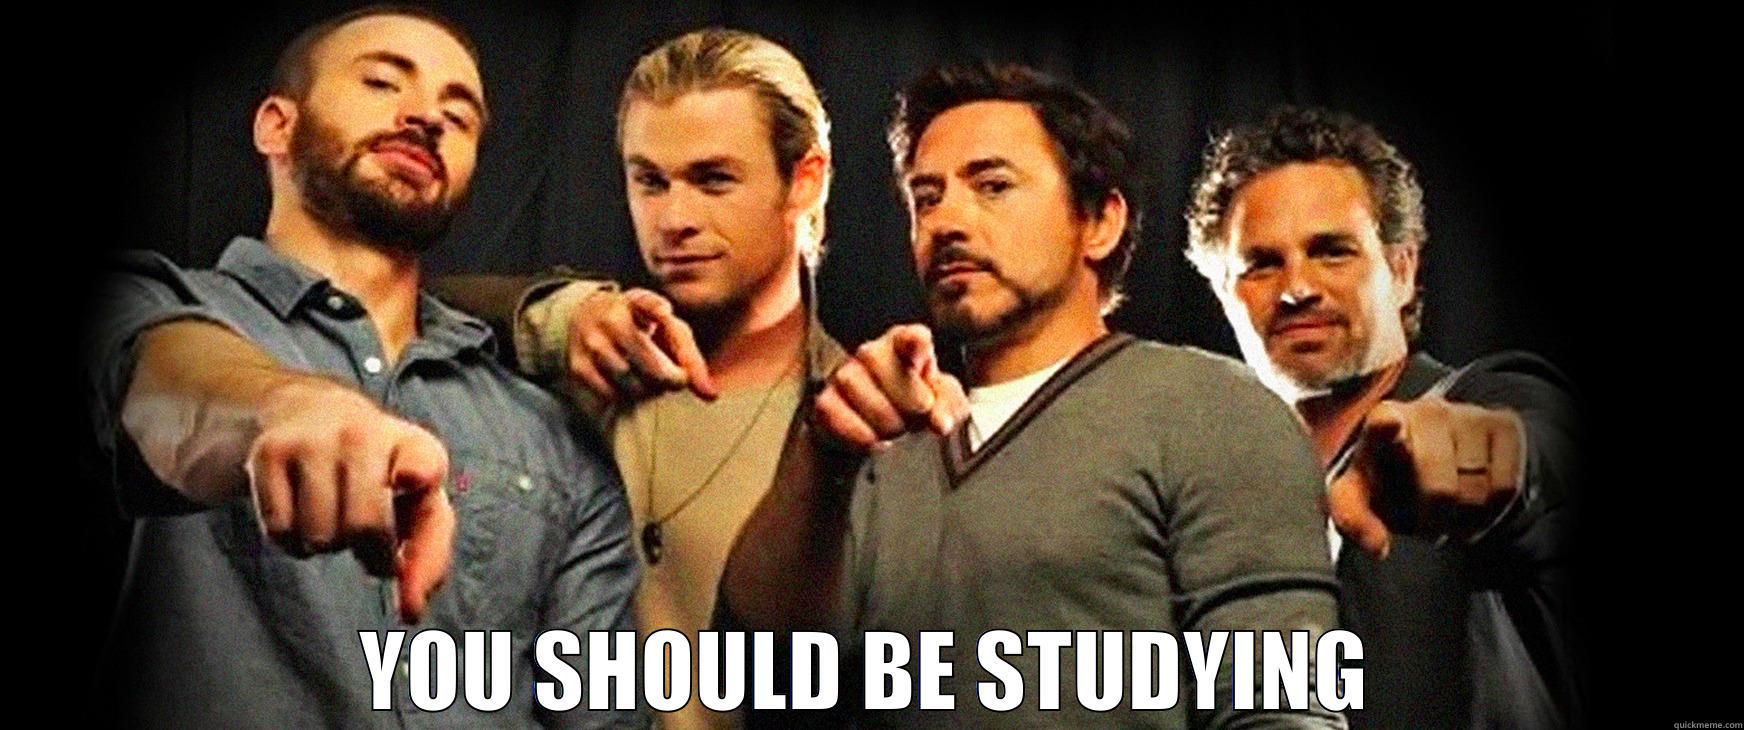 Avengers say study -  YOU SHOULD BE STUDYING Misc